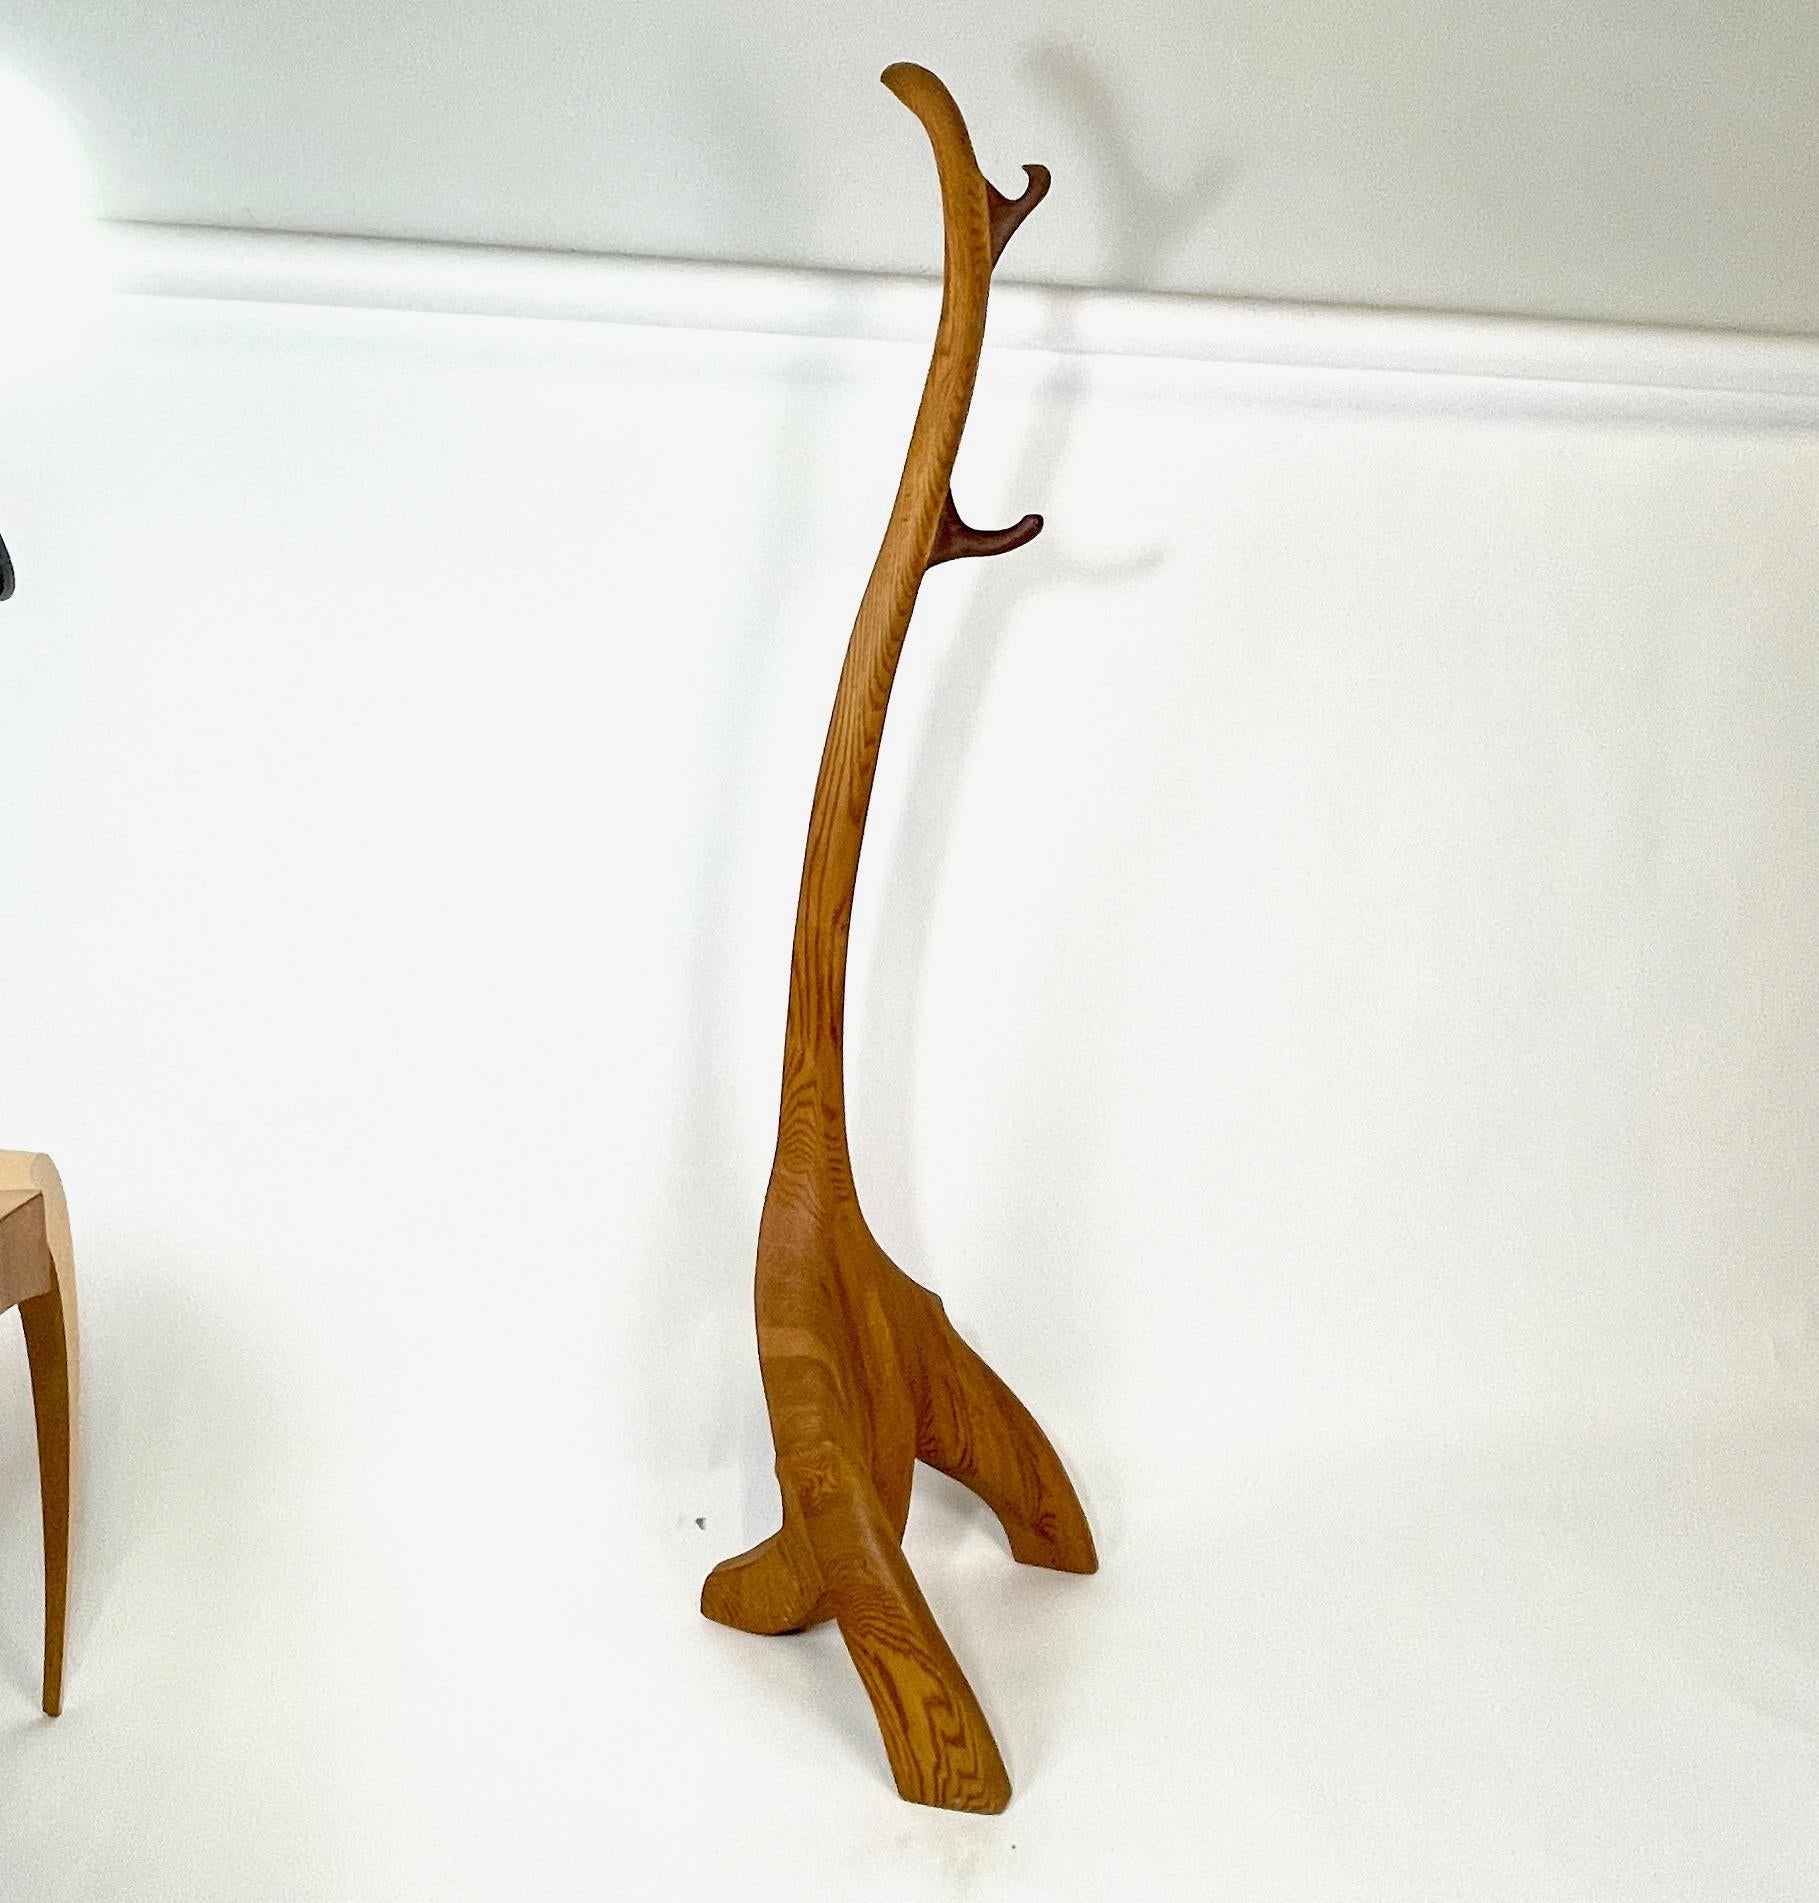 American Craftsman Tall & Heavy Sculptural Handcrafted Coat Rack in the style of Wendell Castle